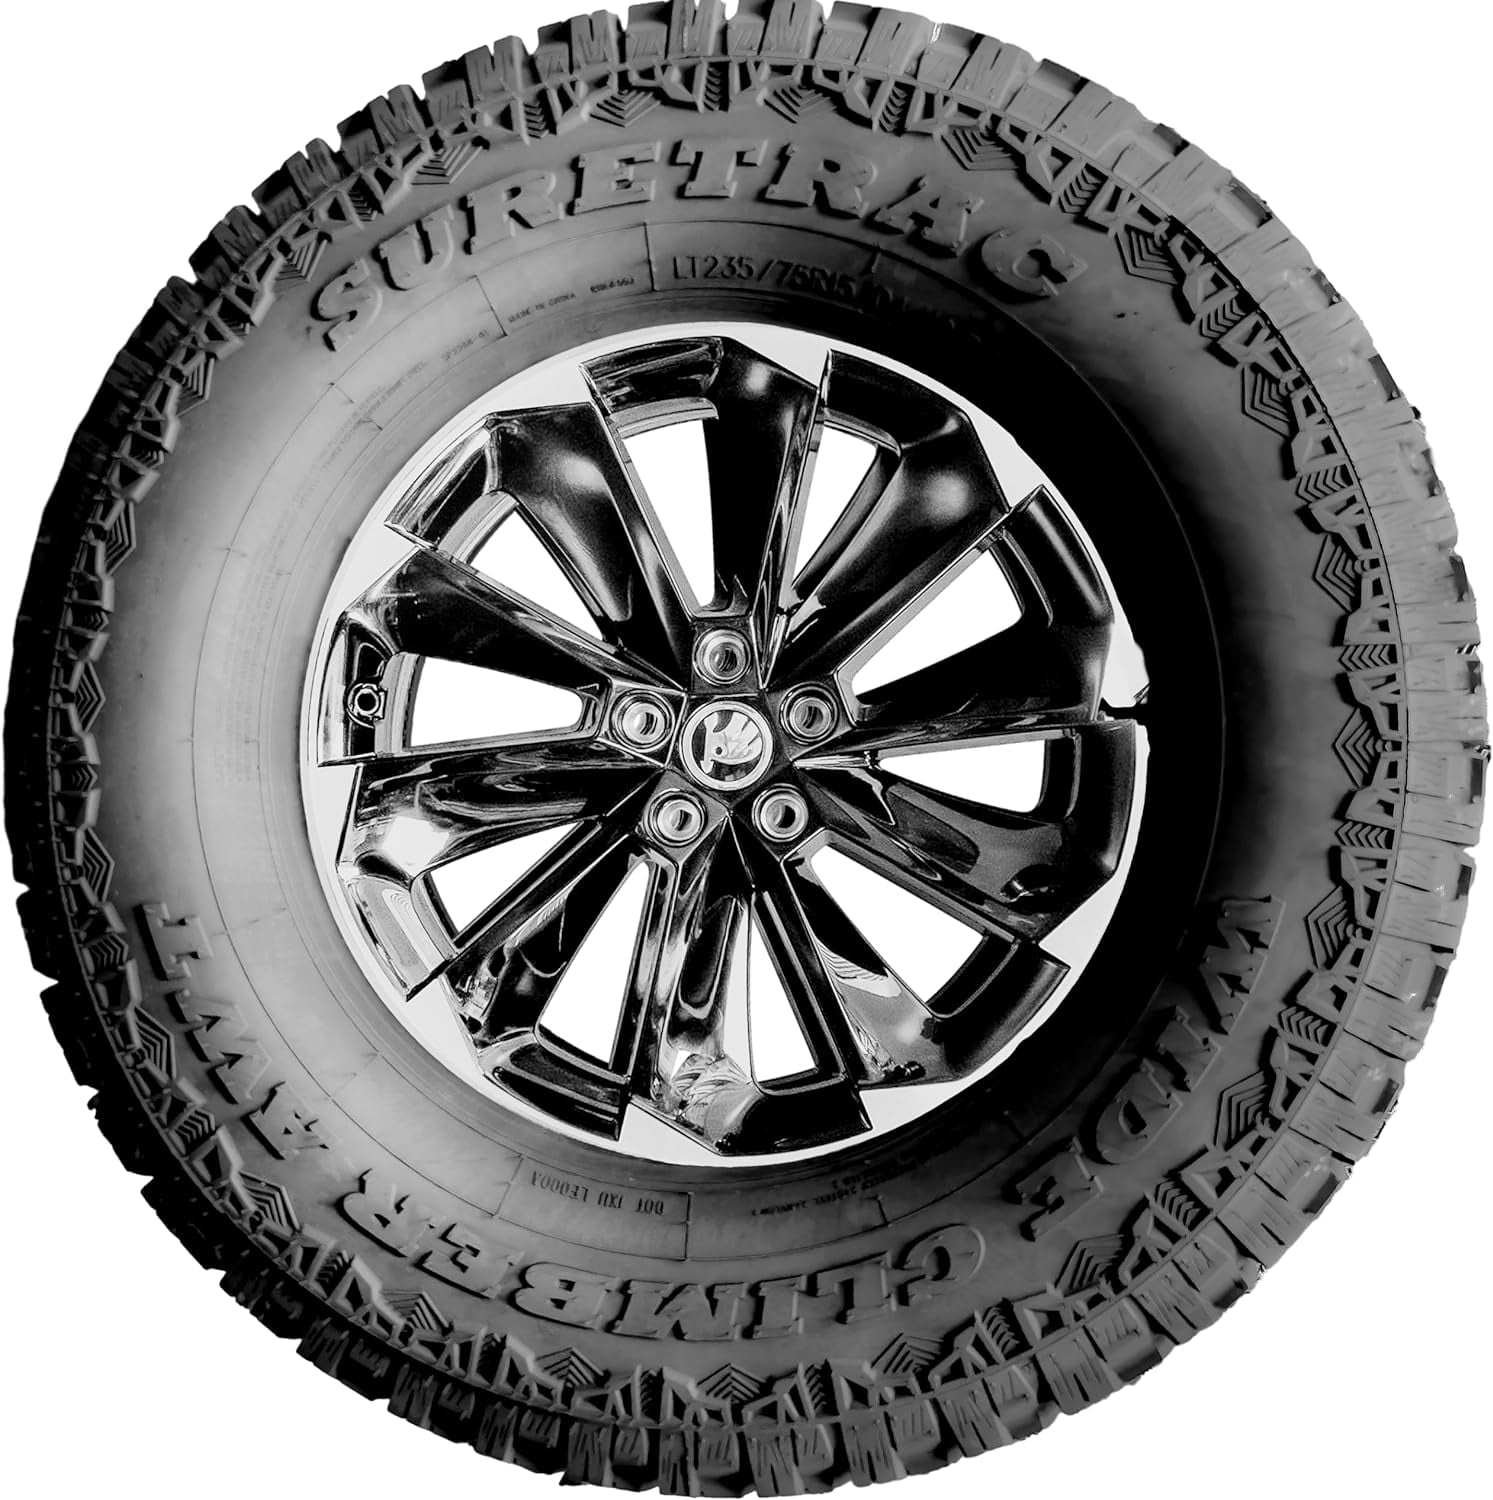 OWL Weather road F/12 AWT All Climber 125Q truck Suretrac tire Traction Terrain All off Wide light LT35X12.50R20